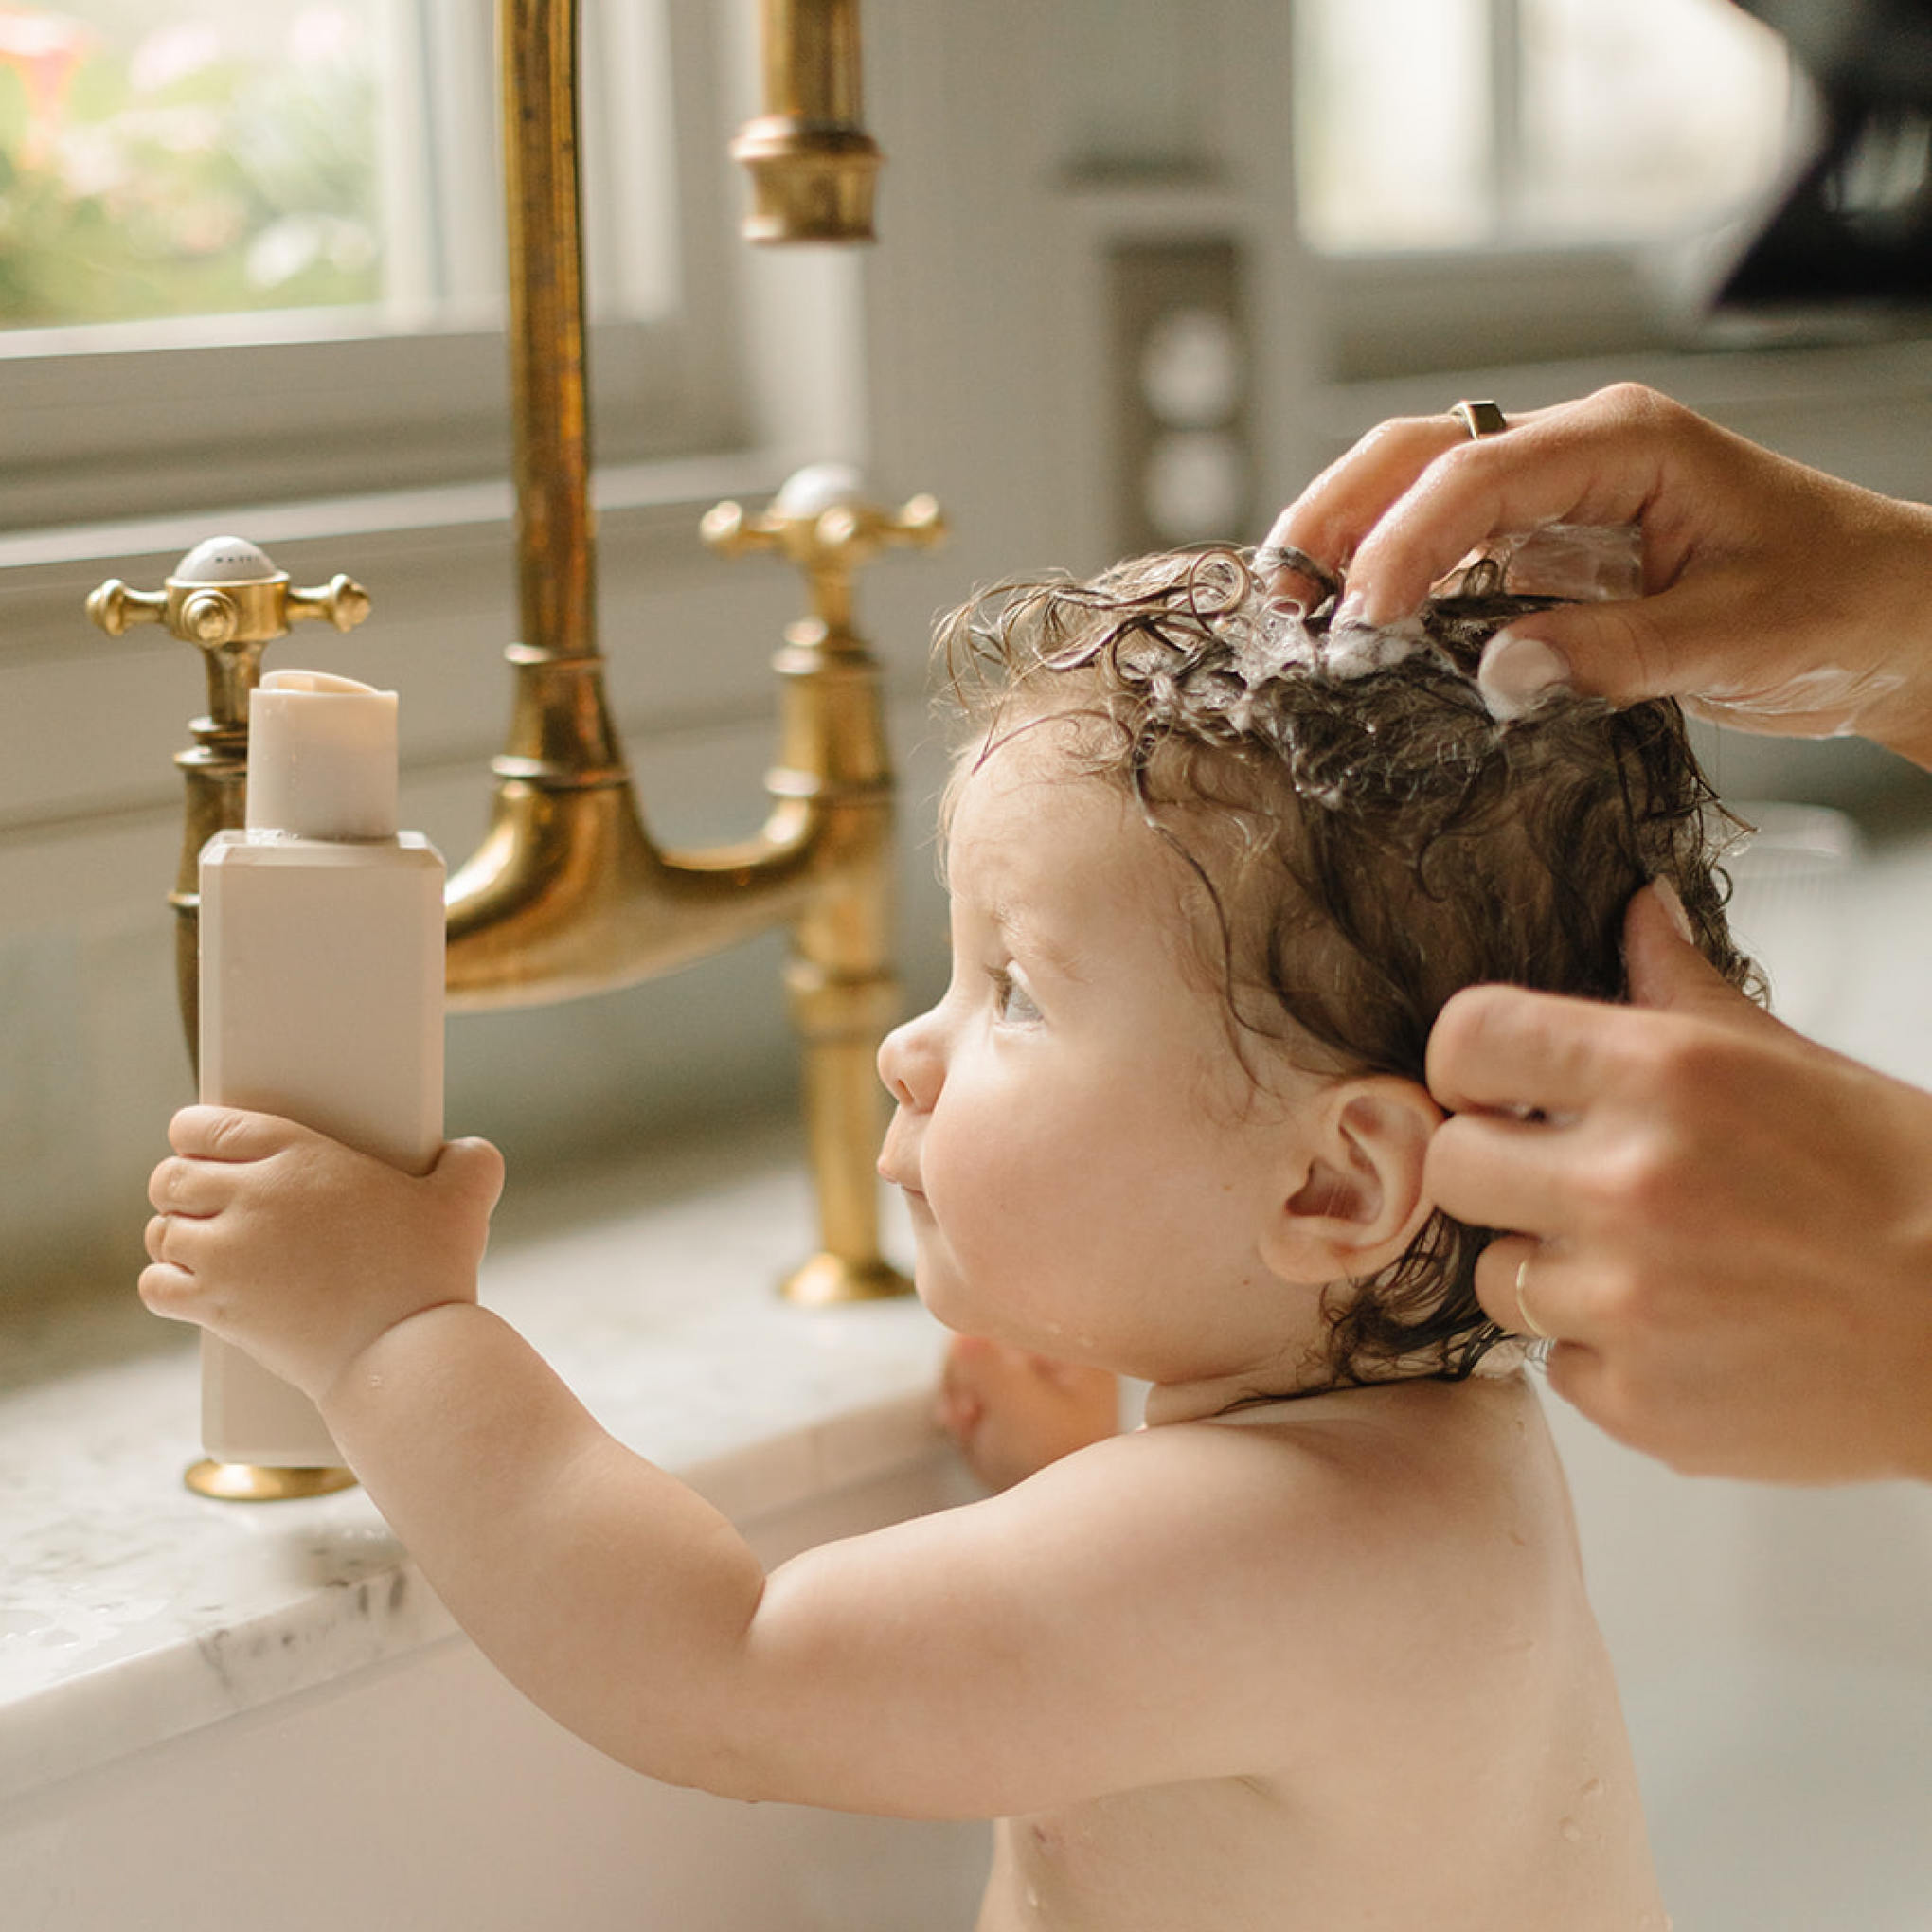 Is Emulsifying Wax NF Safe For Baby? Yes, For Thickening Baby Lotions